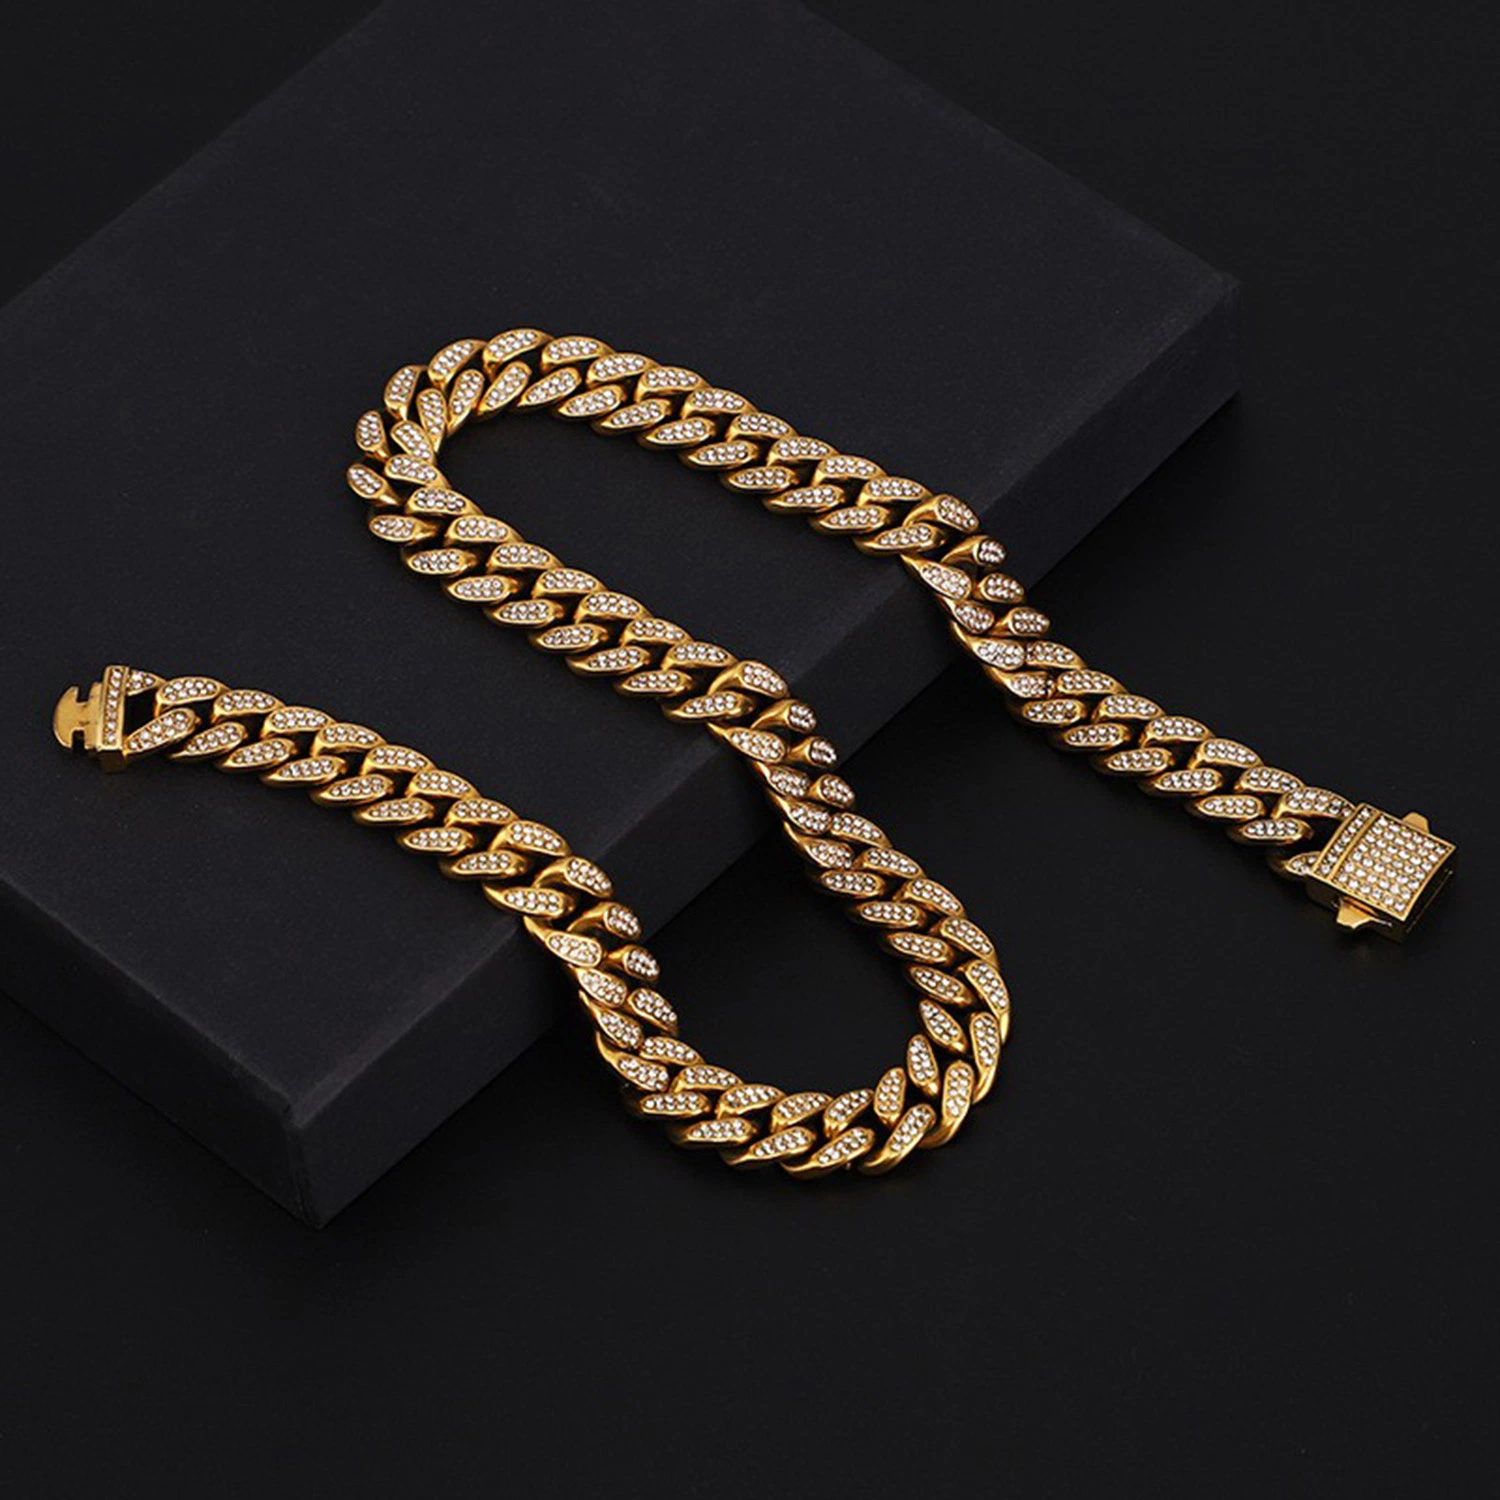 New Popular Stainless Steel Full Diamond Cuban Chain Bracelet Necklace Men's Fashion Trend Student Accessories Bl2221